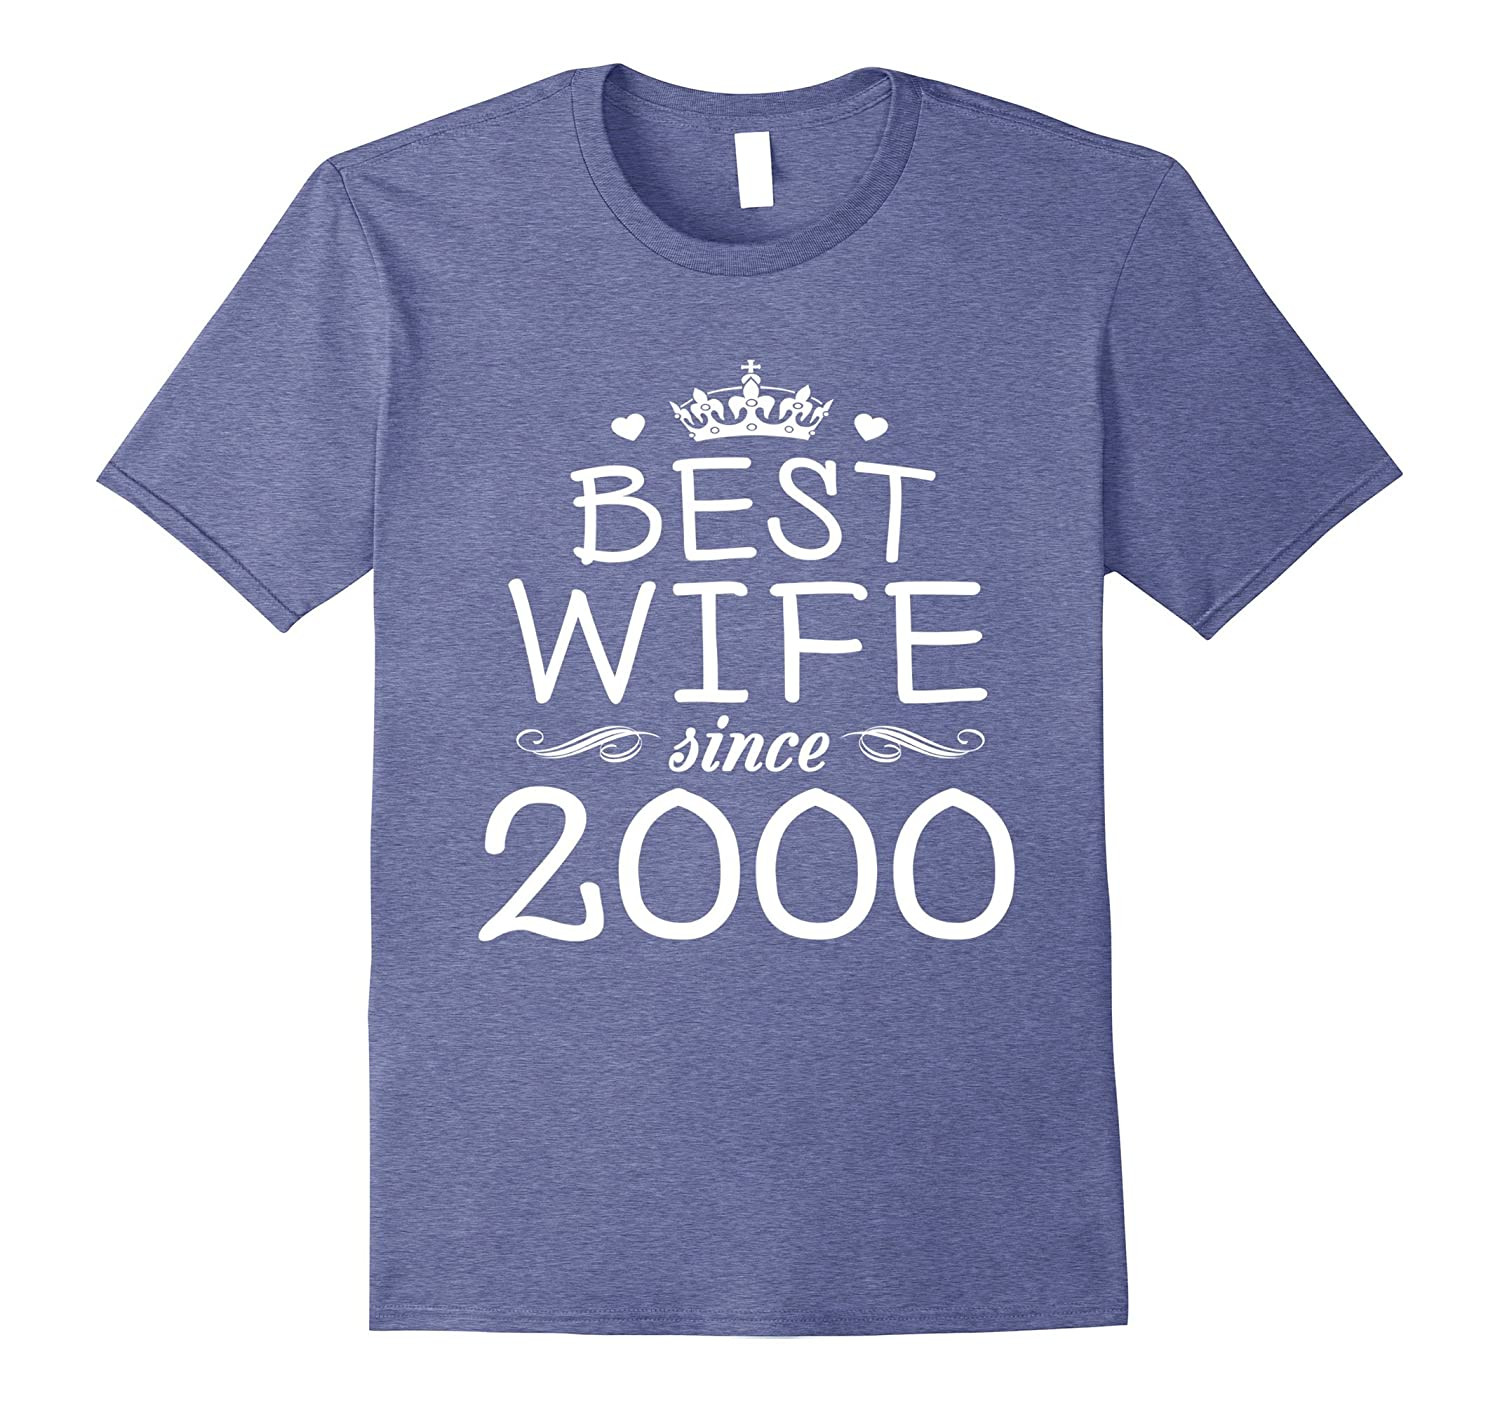 17Th Anniversary Gift Ideas
 17th Wedding Anniversary Gift Ideas For Her Wife Since